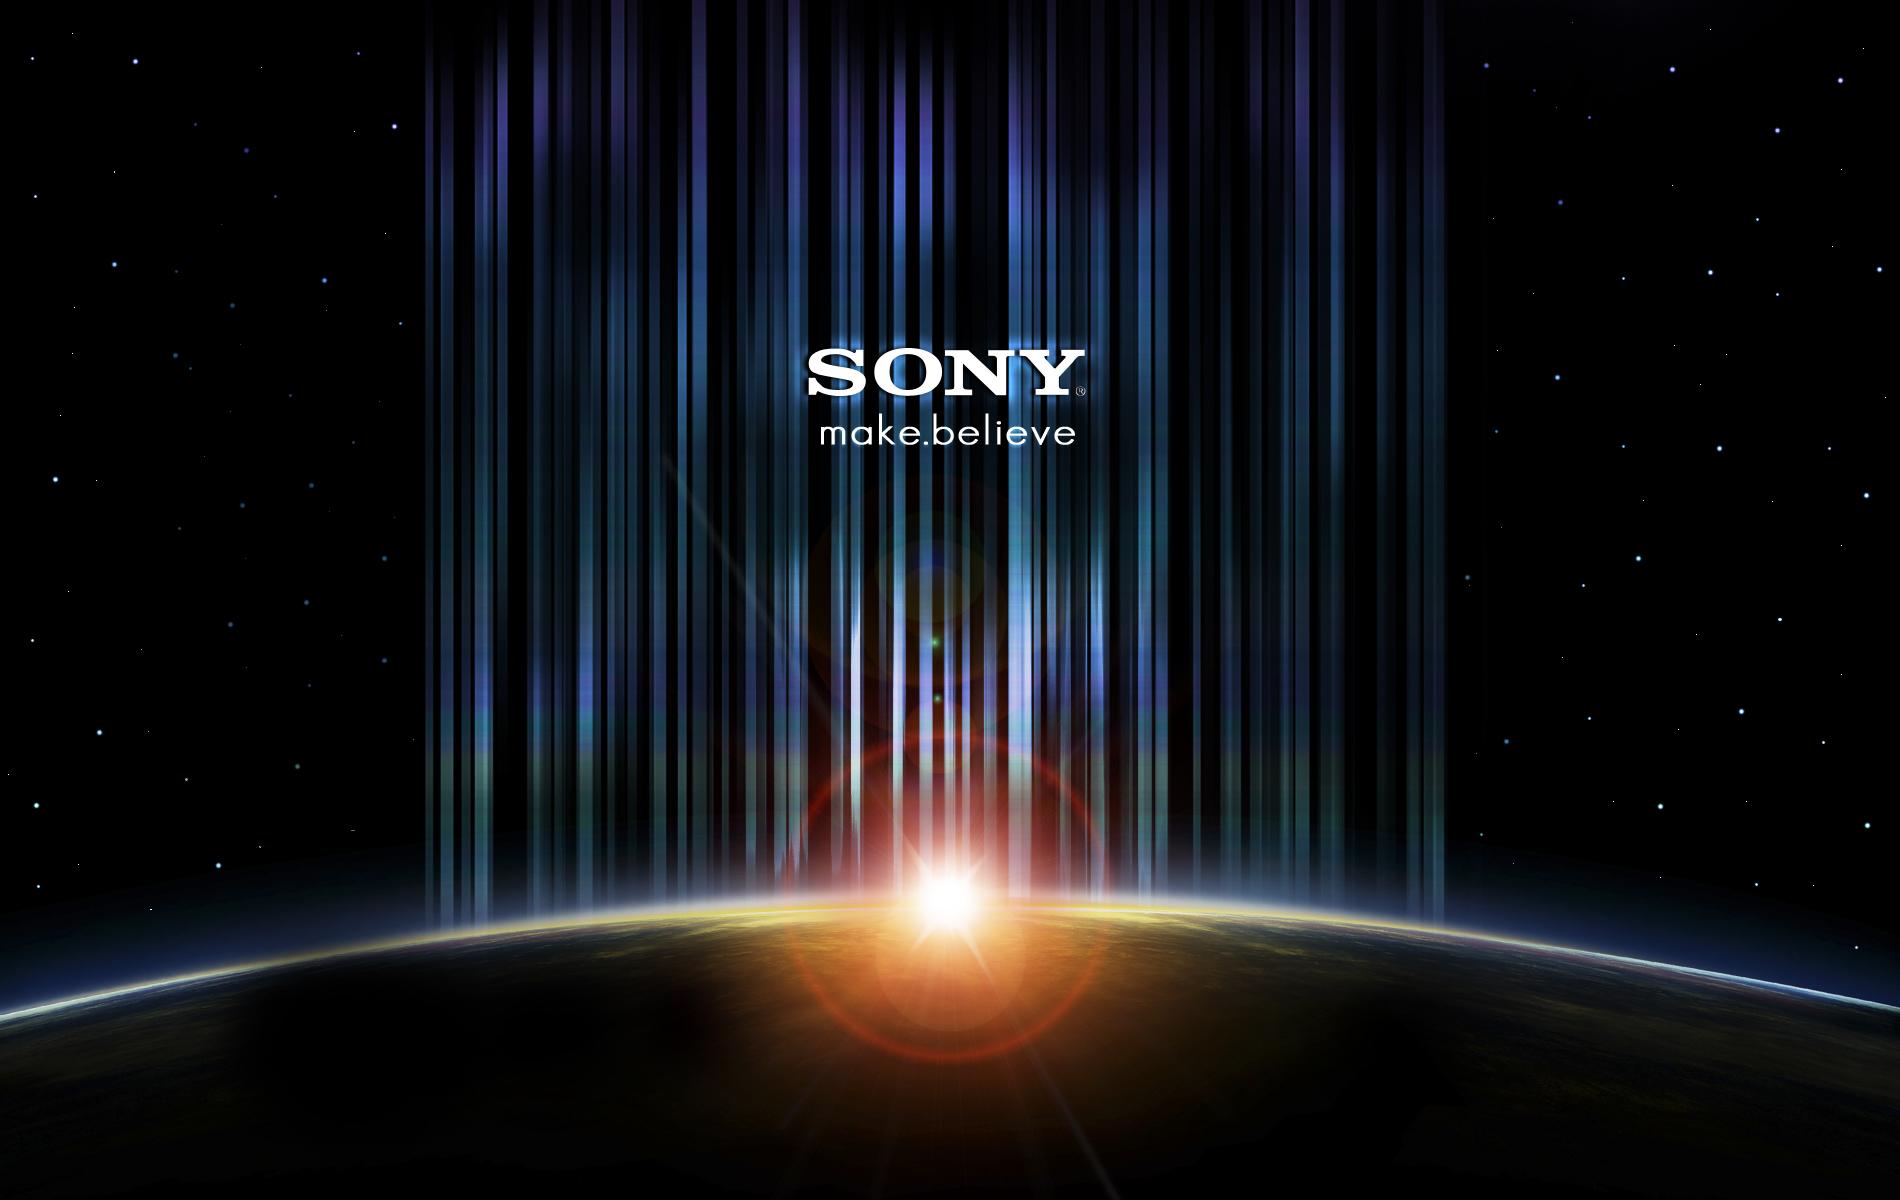 Sony Ultra Hd Wallpapers Top Free Sony Ultra Hd Backgrounds Wallpaperaccess